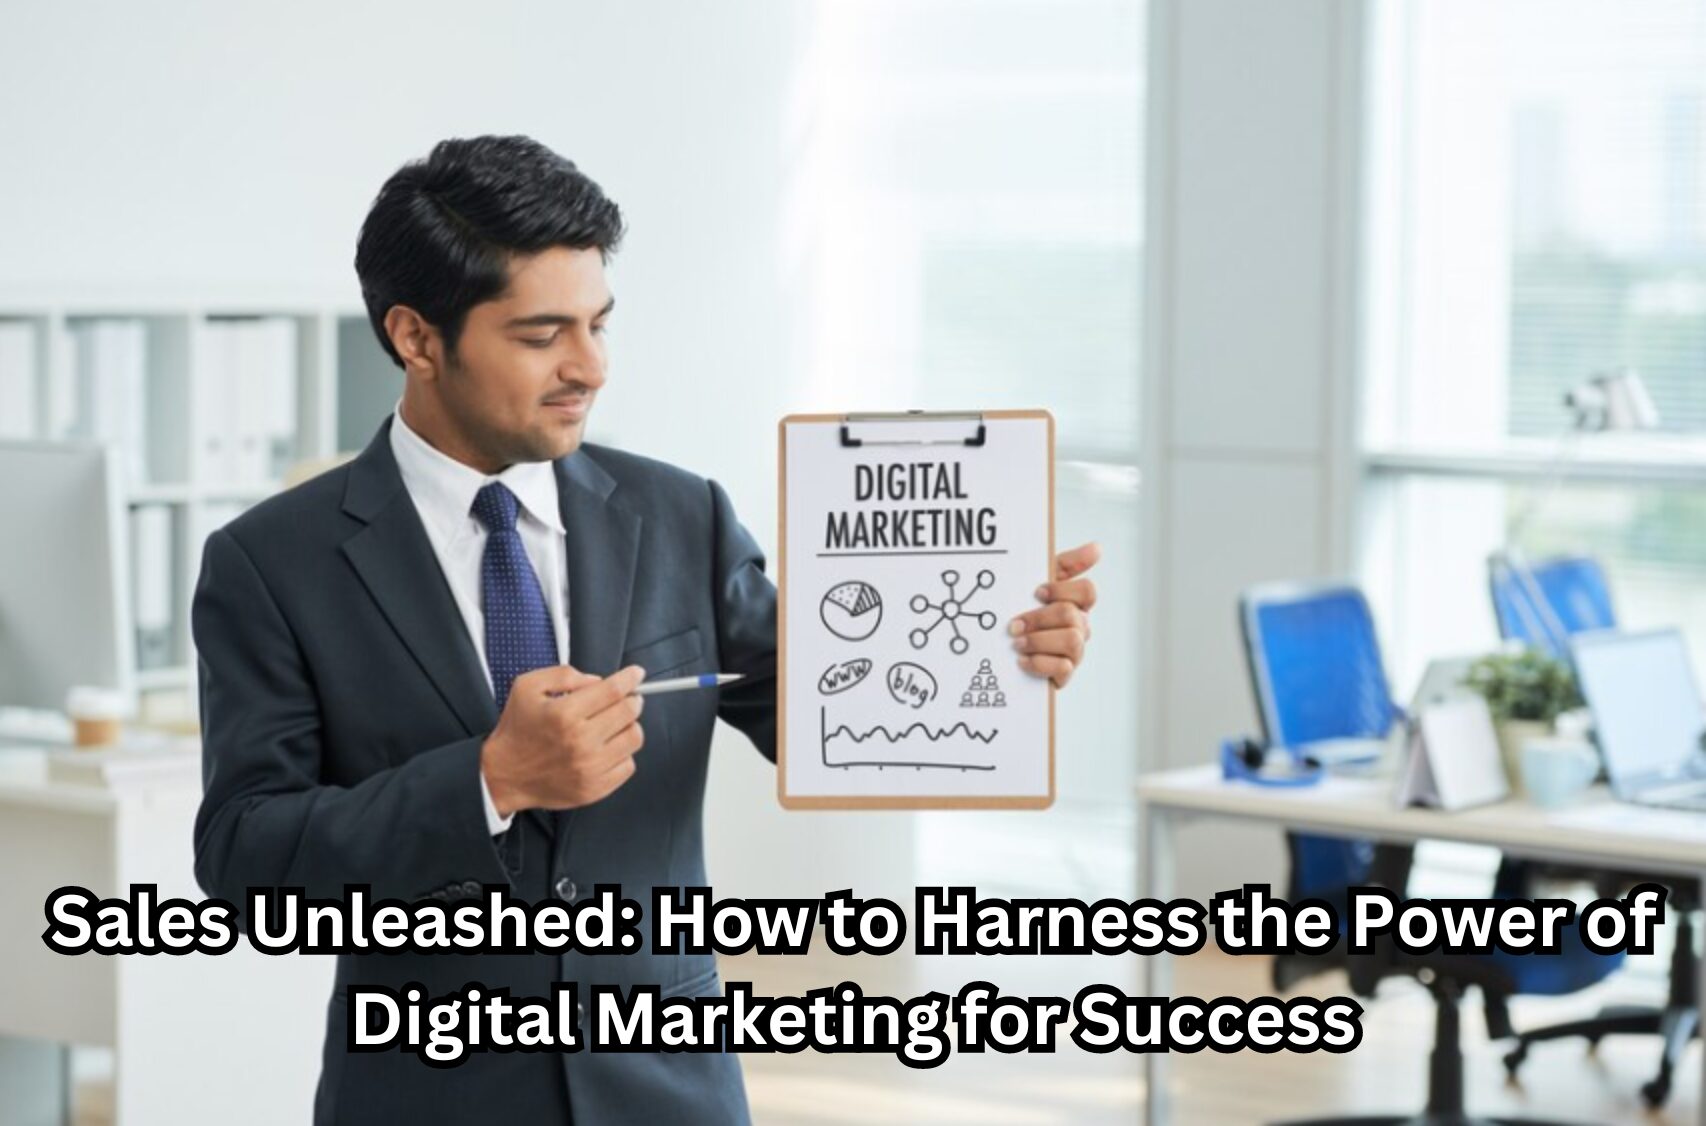 Digital marketing tools and strategies leading to business success, representing the concept of 'Digital Marketing for Success' for the blog 'Sales Unleashed: How to Harness the Power of Digital Marketing for Success.